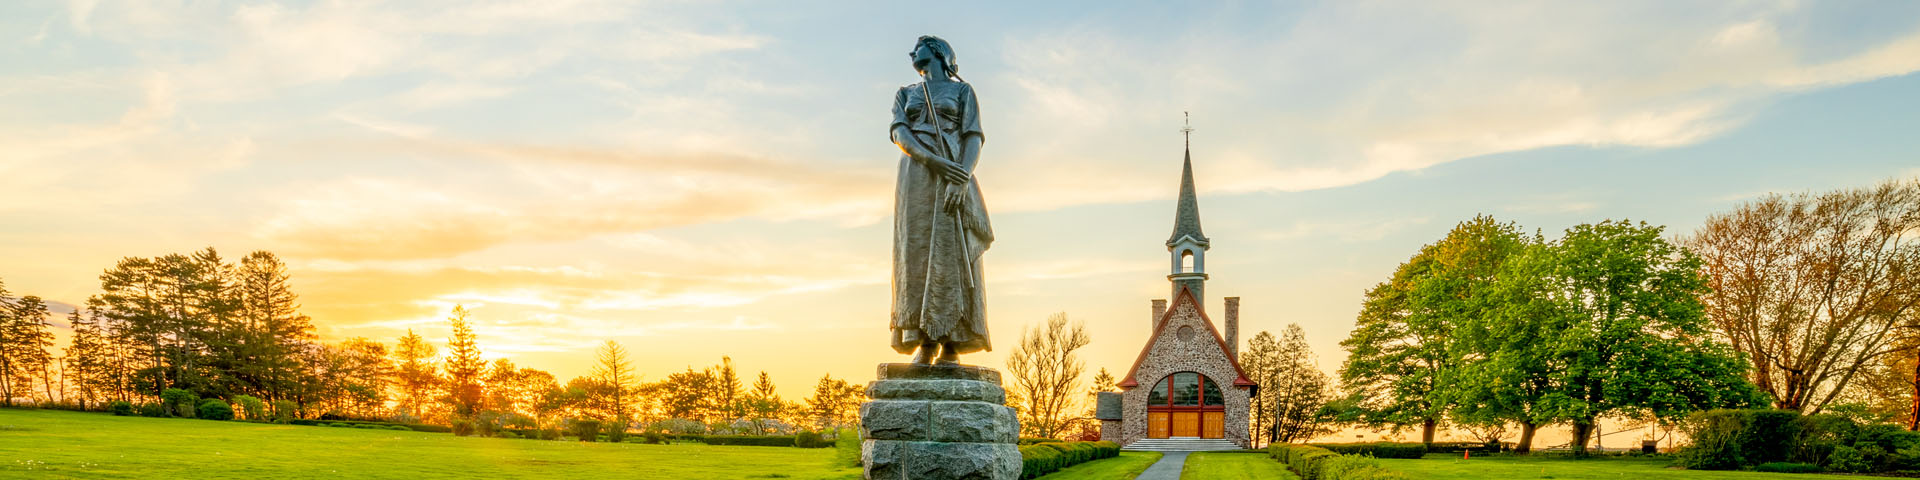 The statue of Evangeline with the Grand-Pré Memorial Church in the background at sunset.